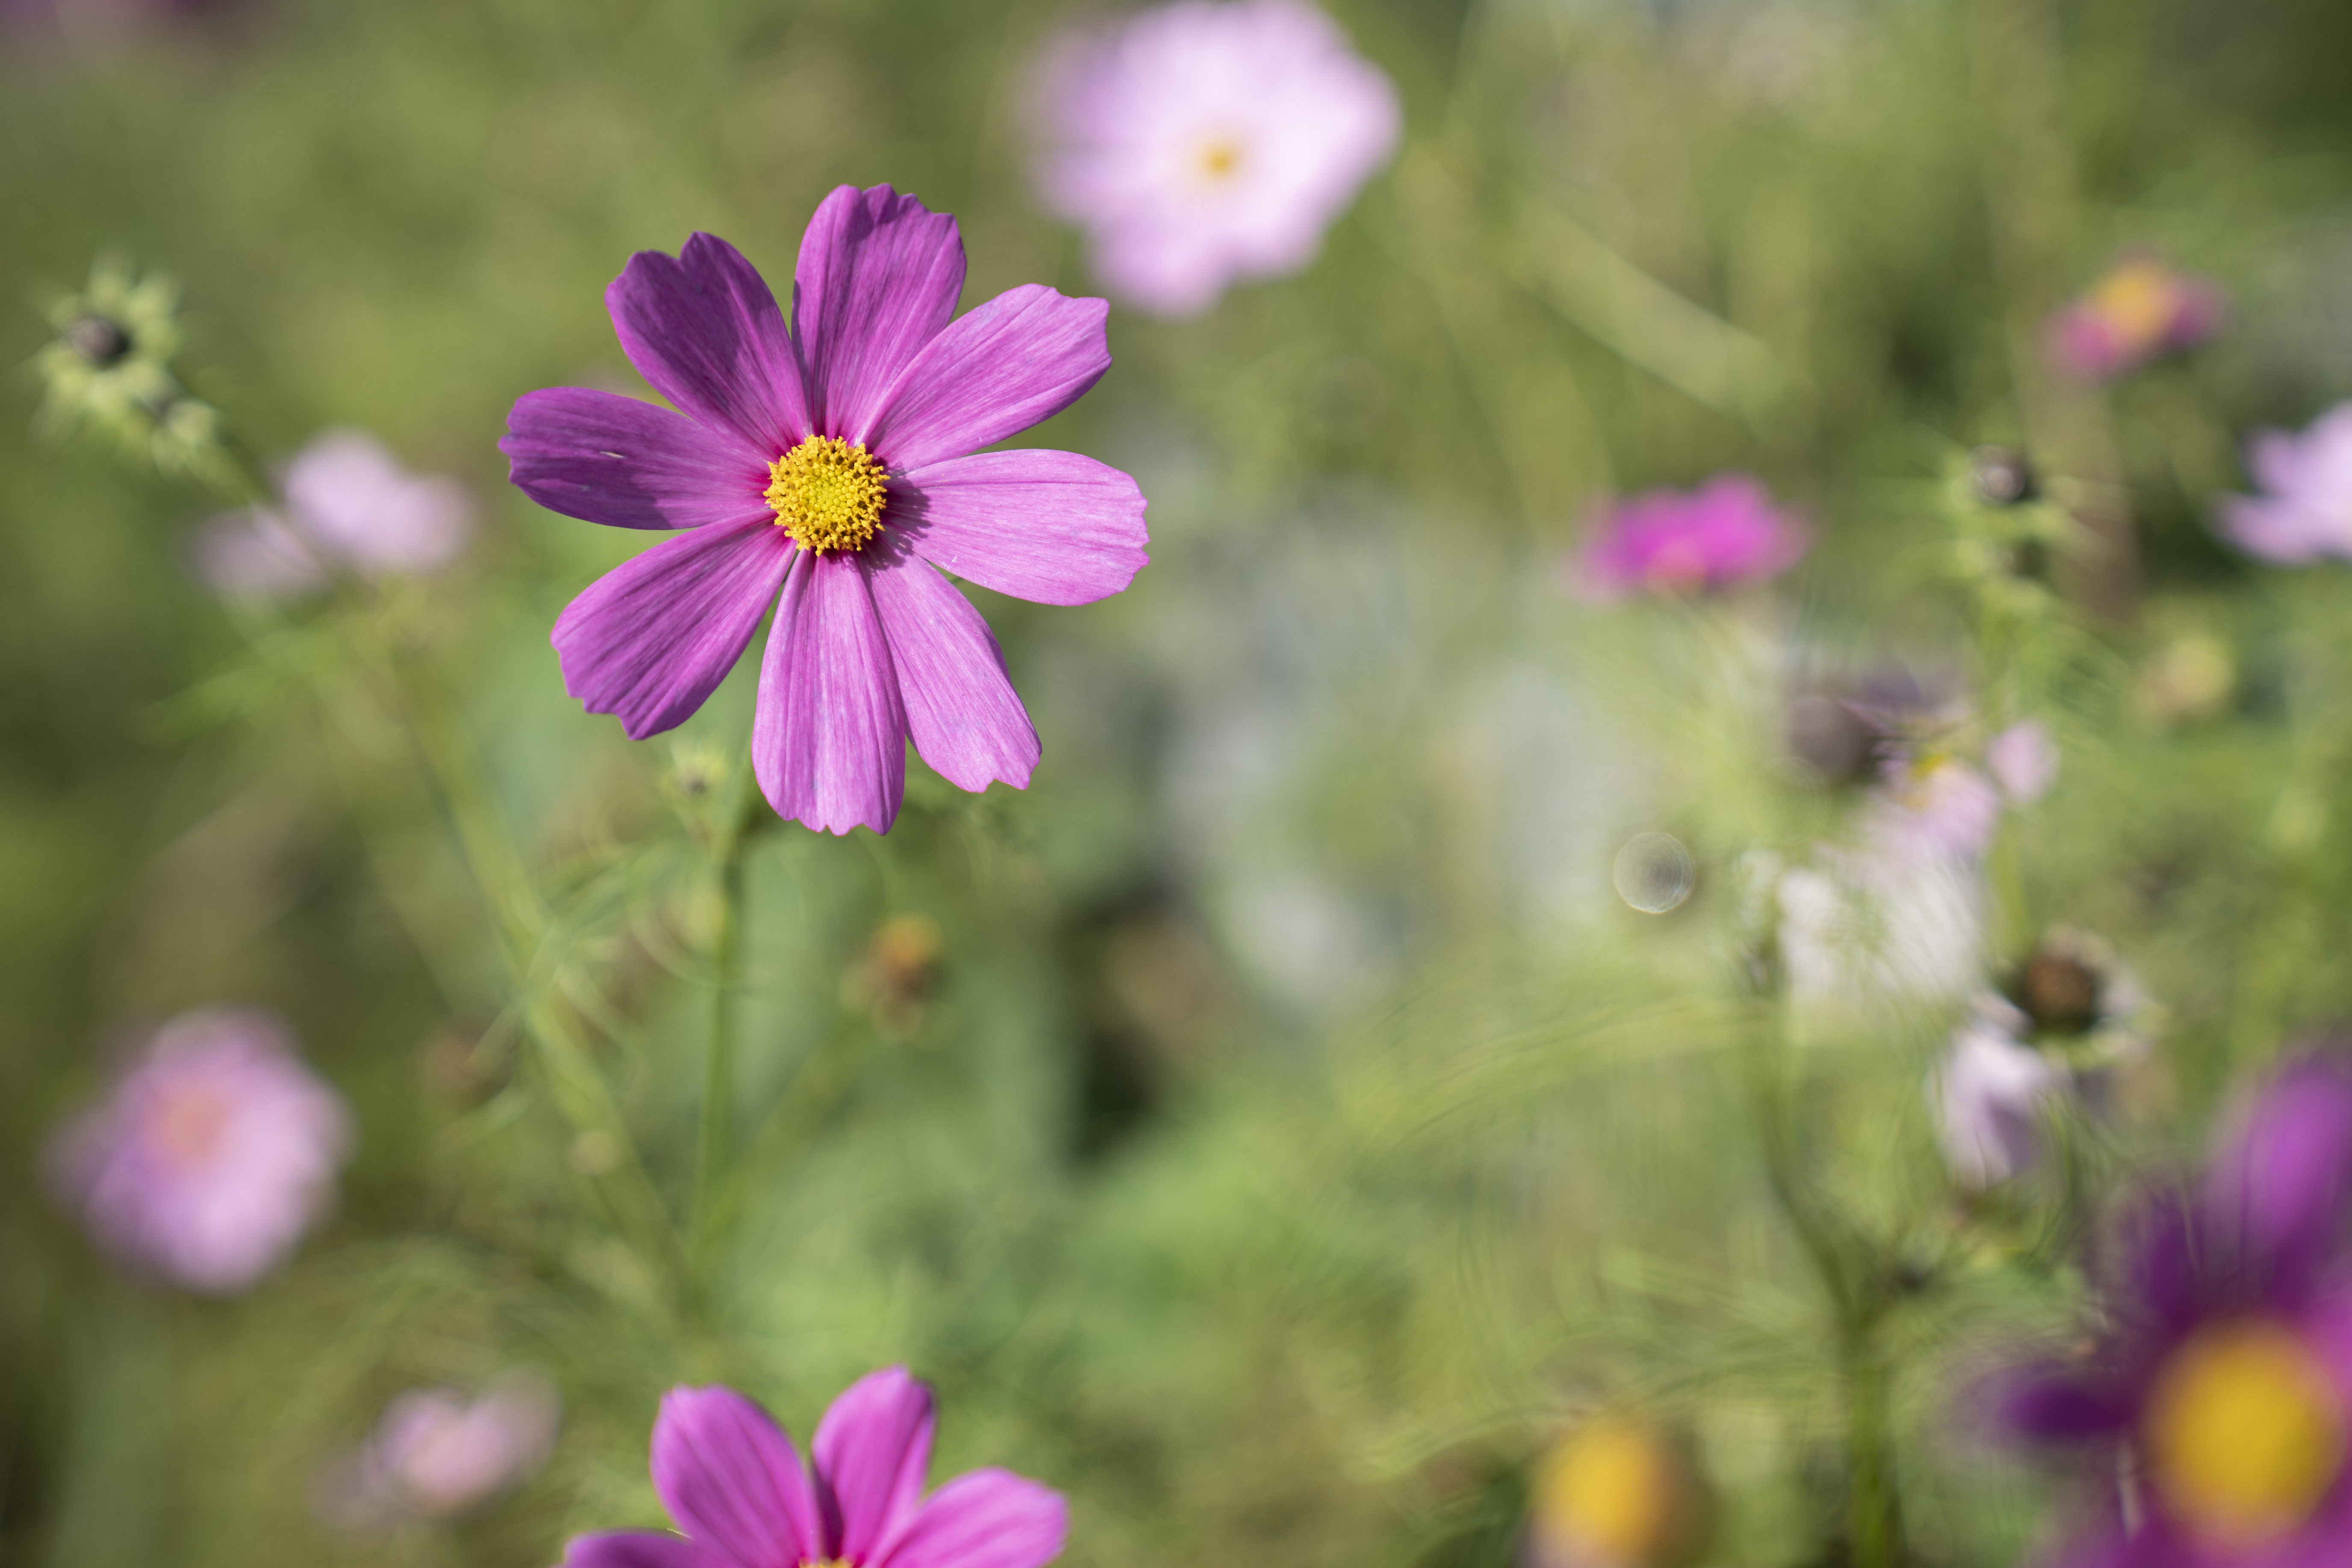 A pink flower photographed on the Sony A7 IV camera